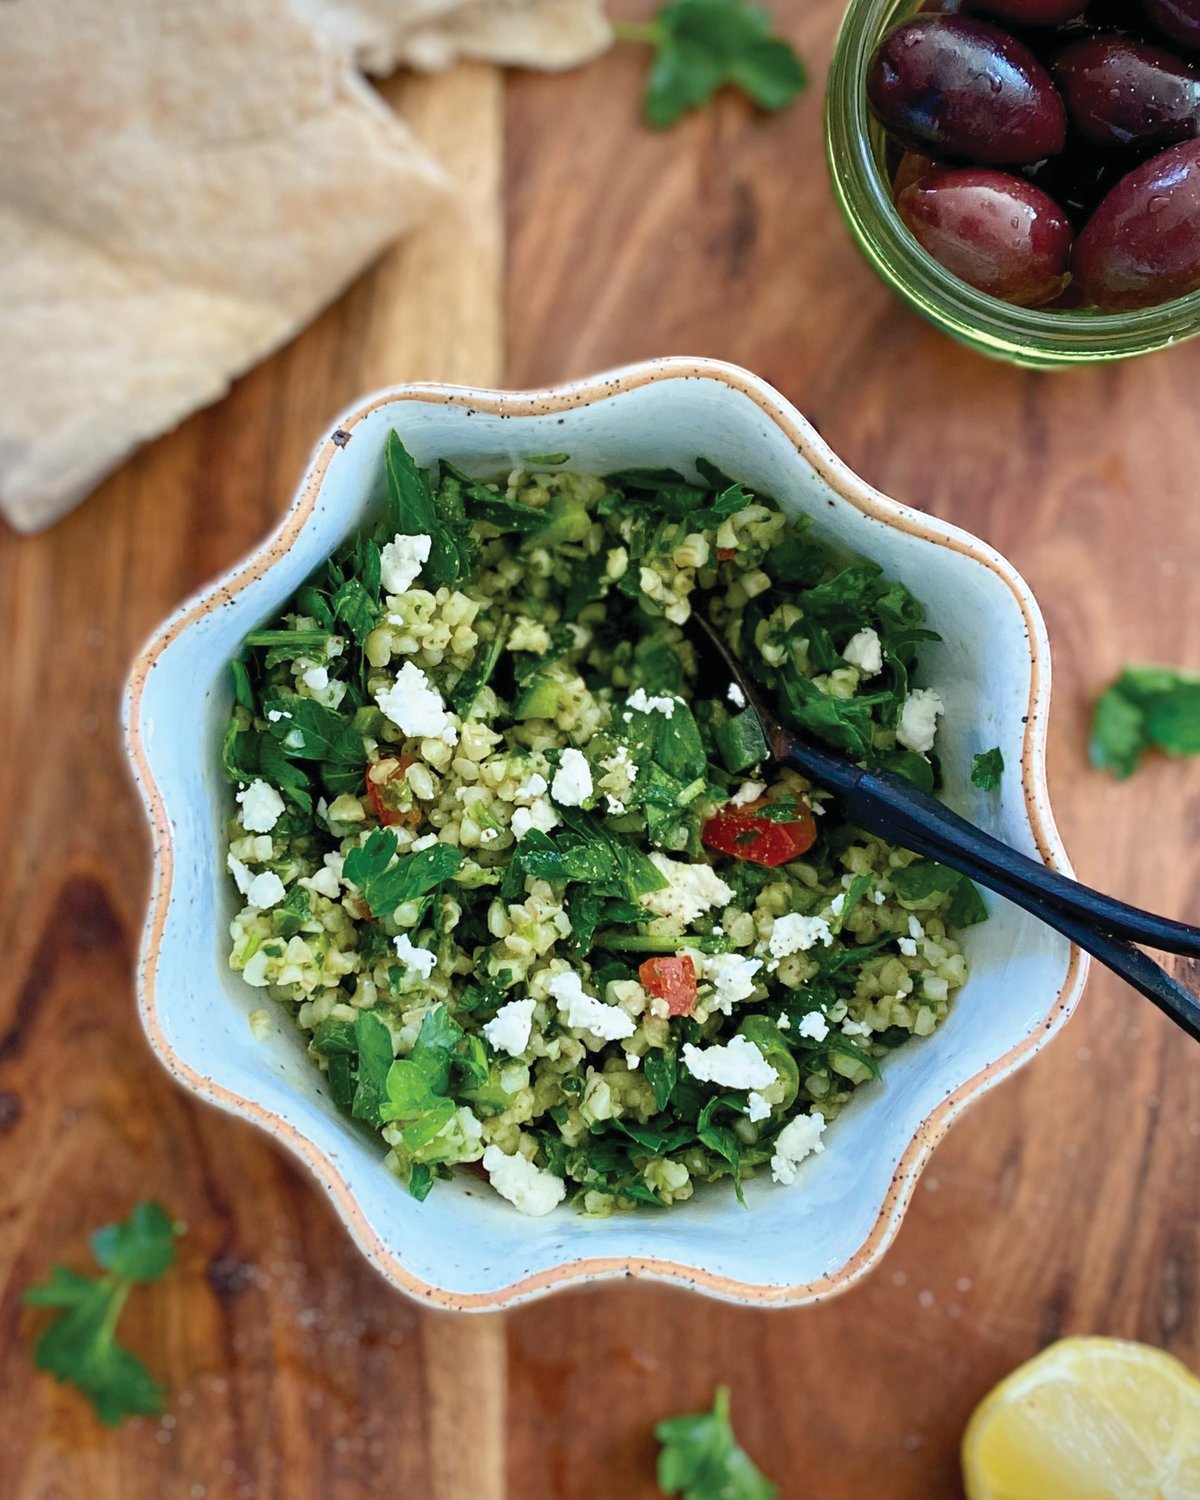 Tabbouleh is a staple in Levantine cuisine, where warm weather salads refresh and nourish.